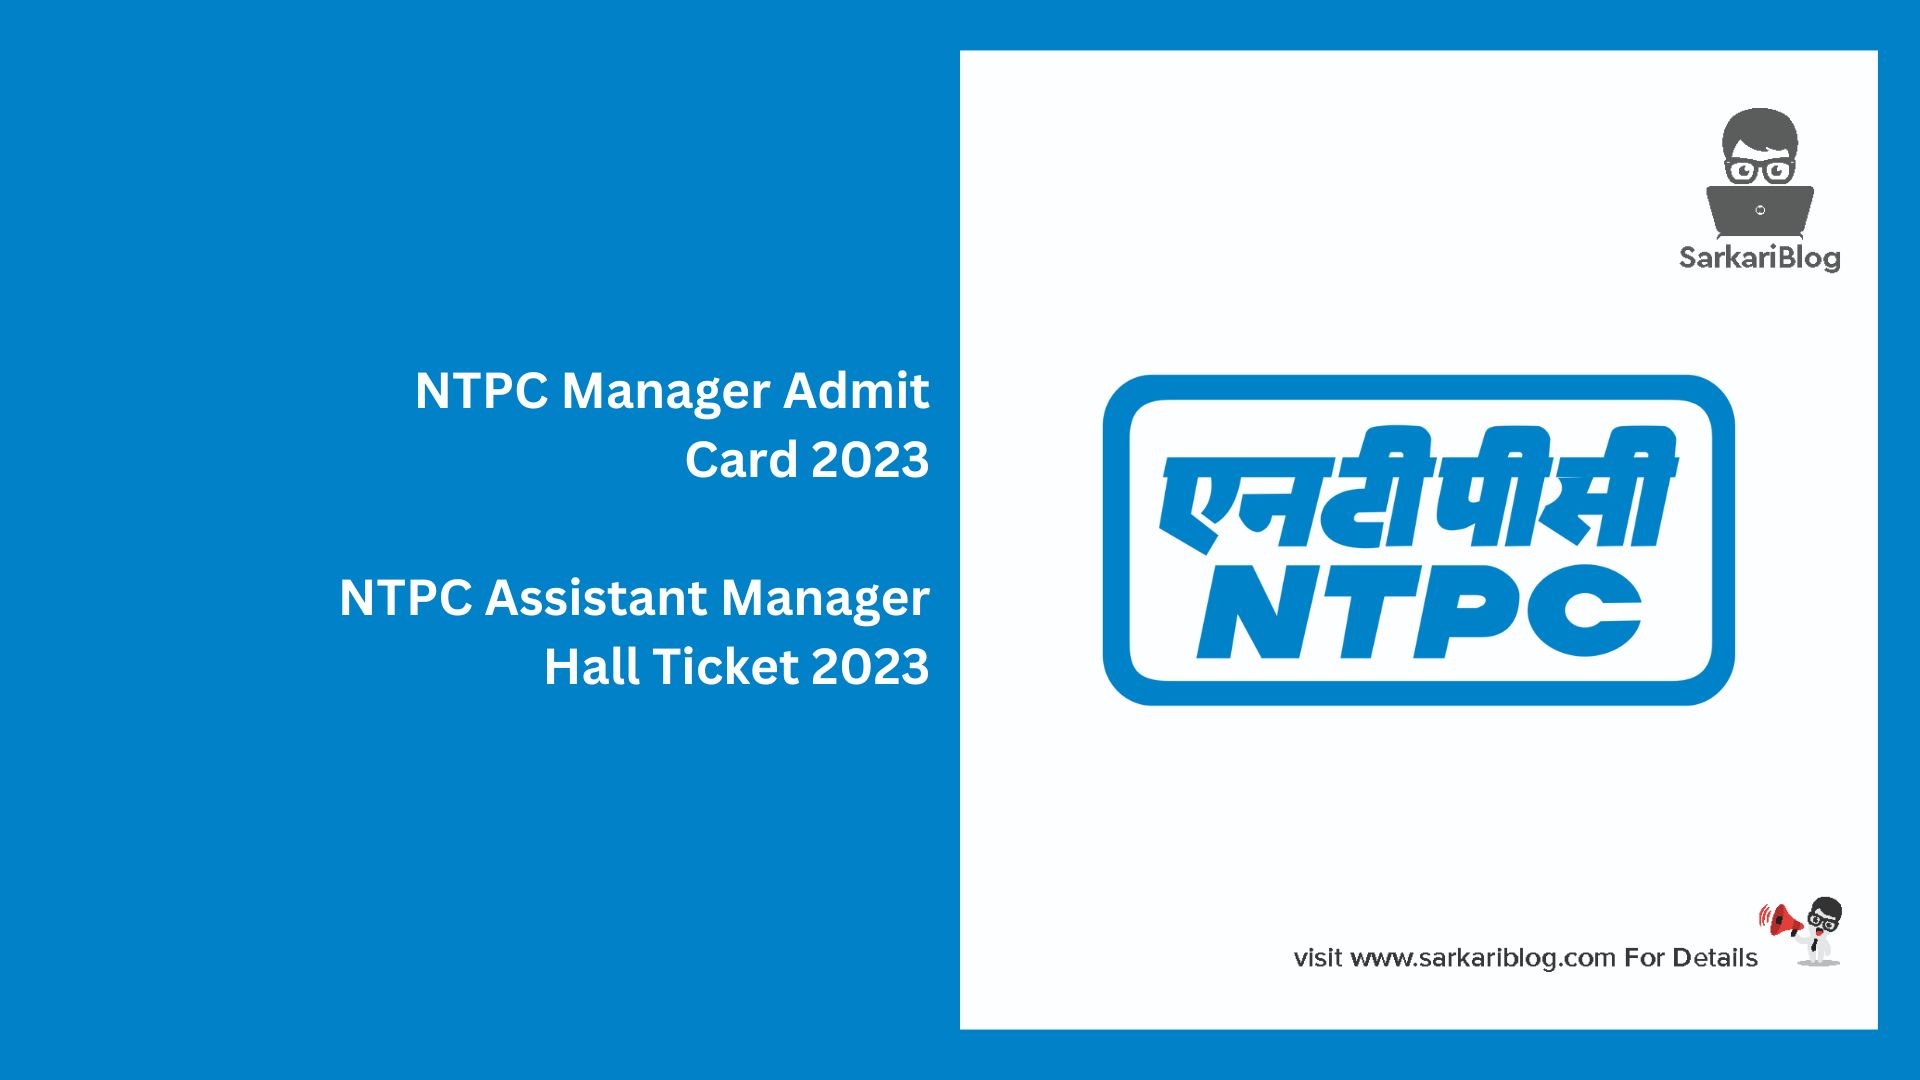 NTPC Manager Admit Card 2023